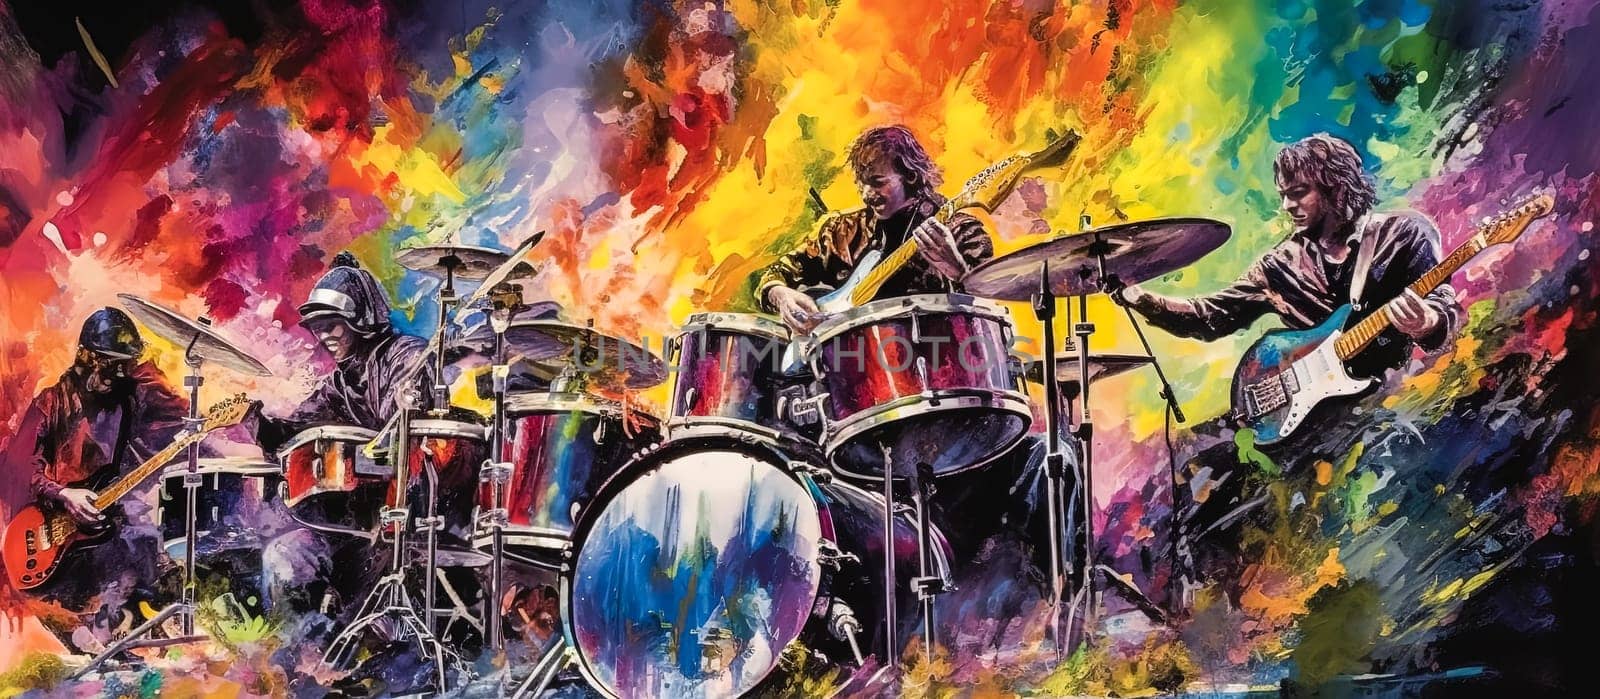 A painting of a band playing with colorful drums and guitars. The mood of the painting is energetic and lively, as the band members are fully engaged in their performance